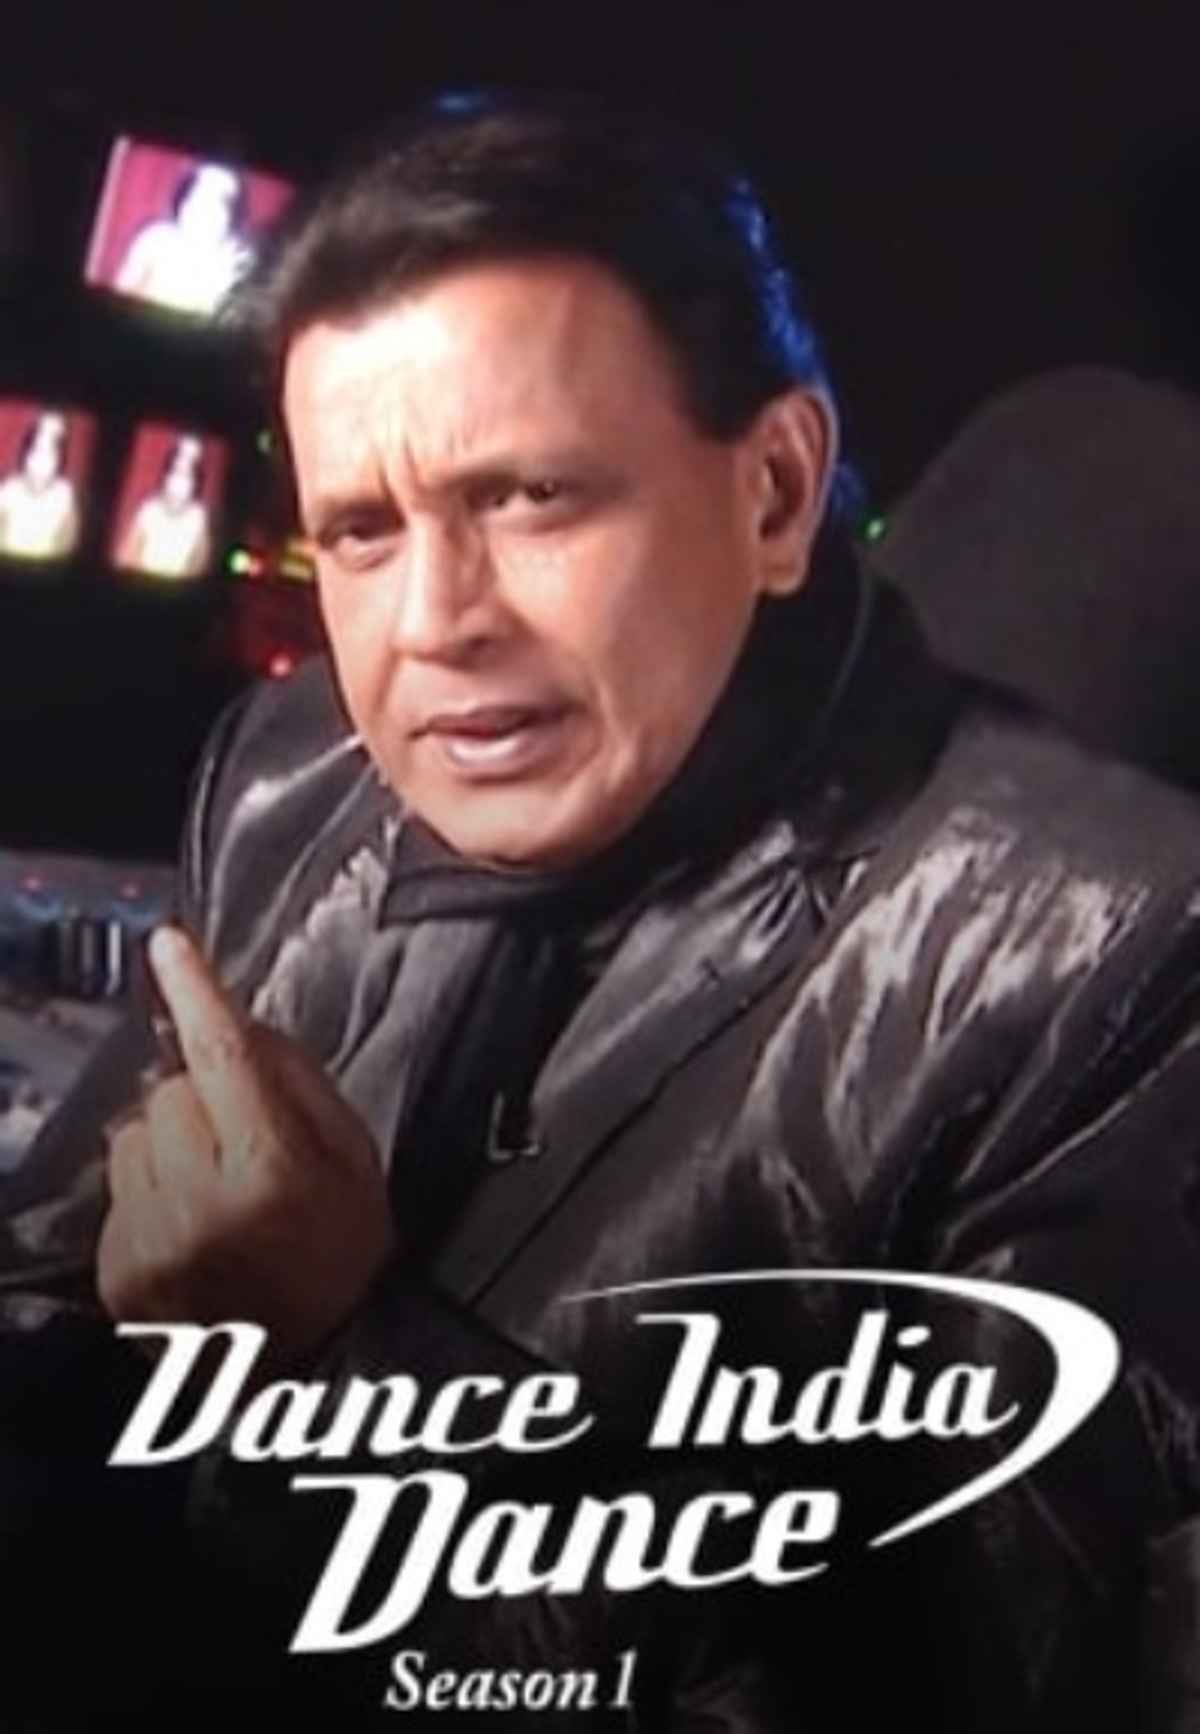 Watch Dance India Dance Online, All Seasons or Episodes, Reality based